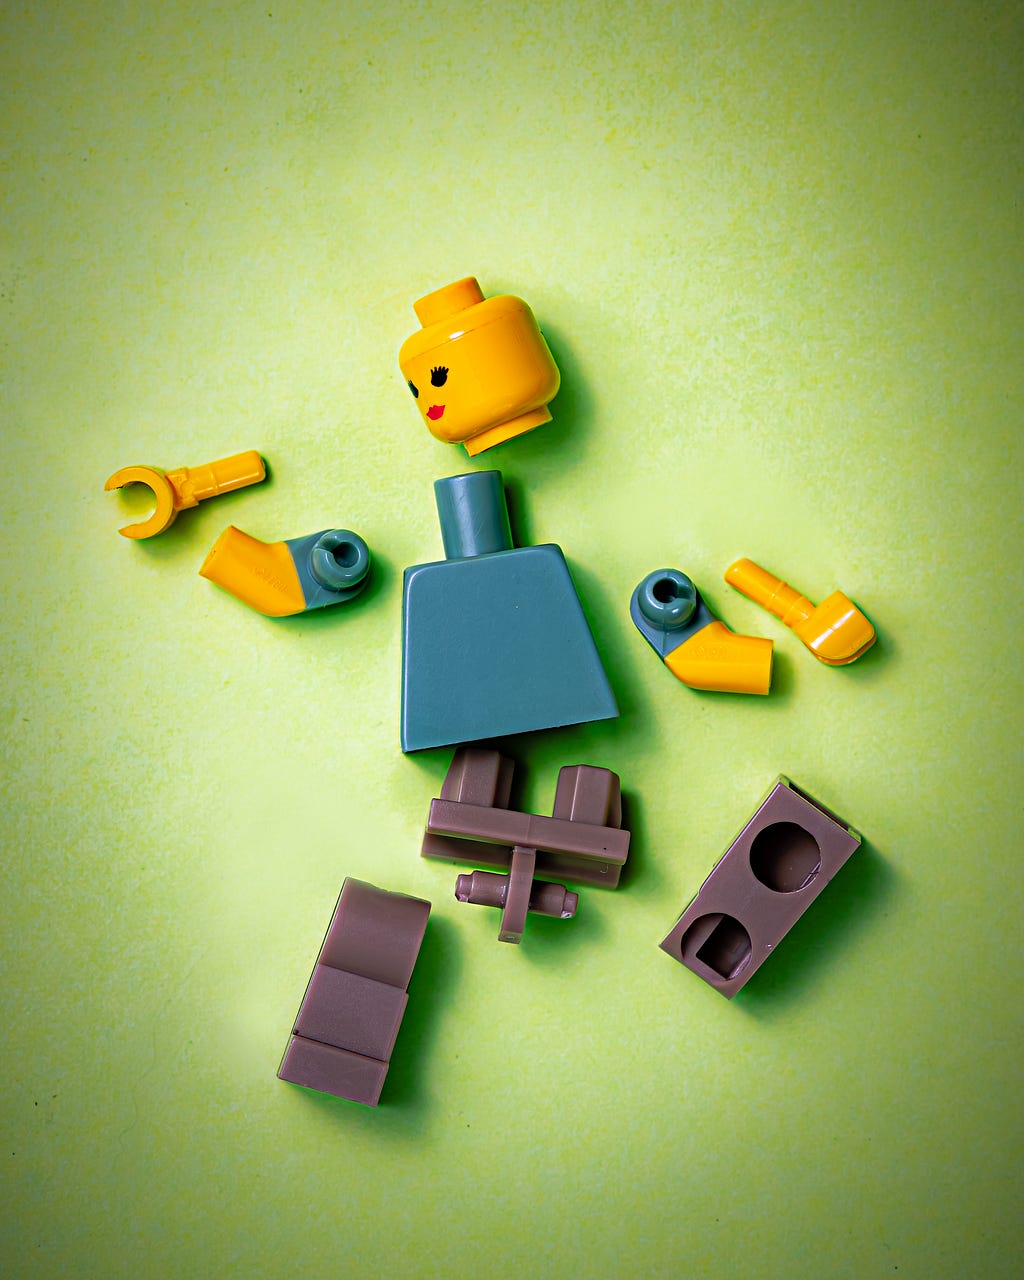 A female Lego figure lies dismantled on a surface with the parts scattered all around.